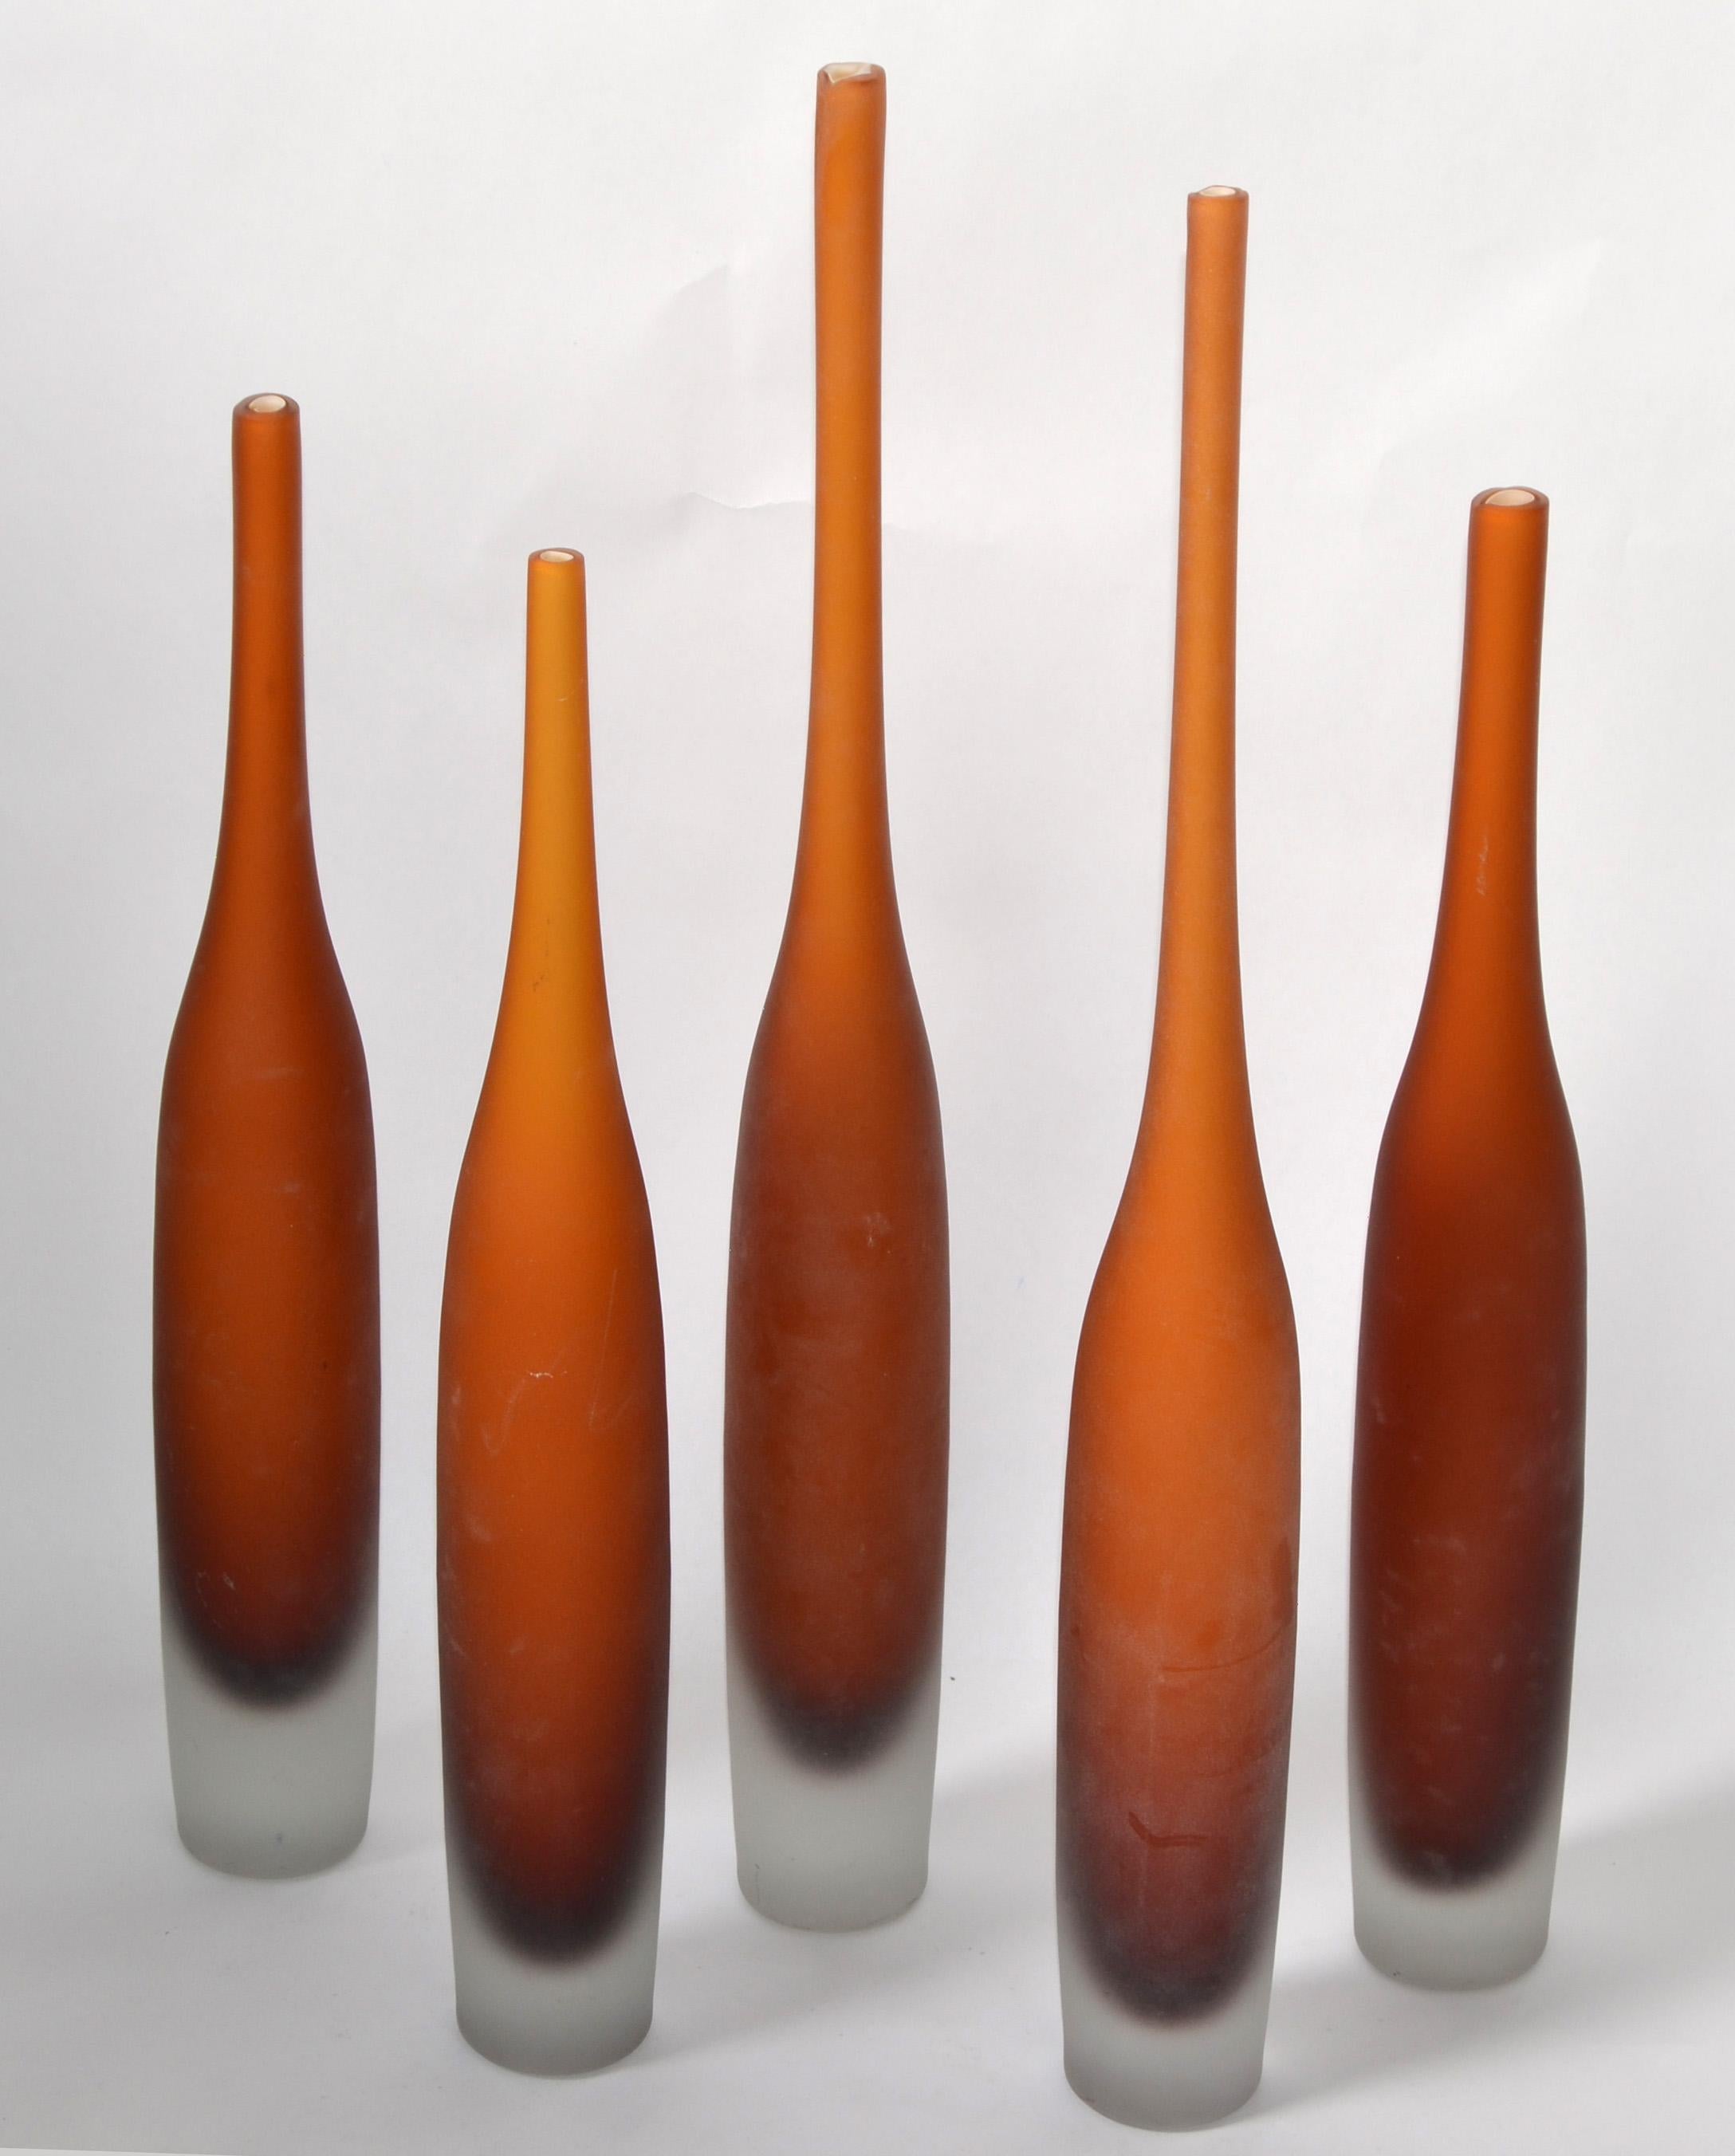 Set of 5 Dark Amber Scavo Glass Murano Art Glass Bud Vases, Bottles, Vessel, Decanter Mid-Century Modern made in Italy in 1980.
The inside is lined with white Glass.
3 Smaller Vase measures: 16 inches Height.
2 Larger Bottles measure: 20 inches